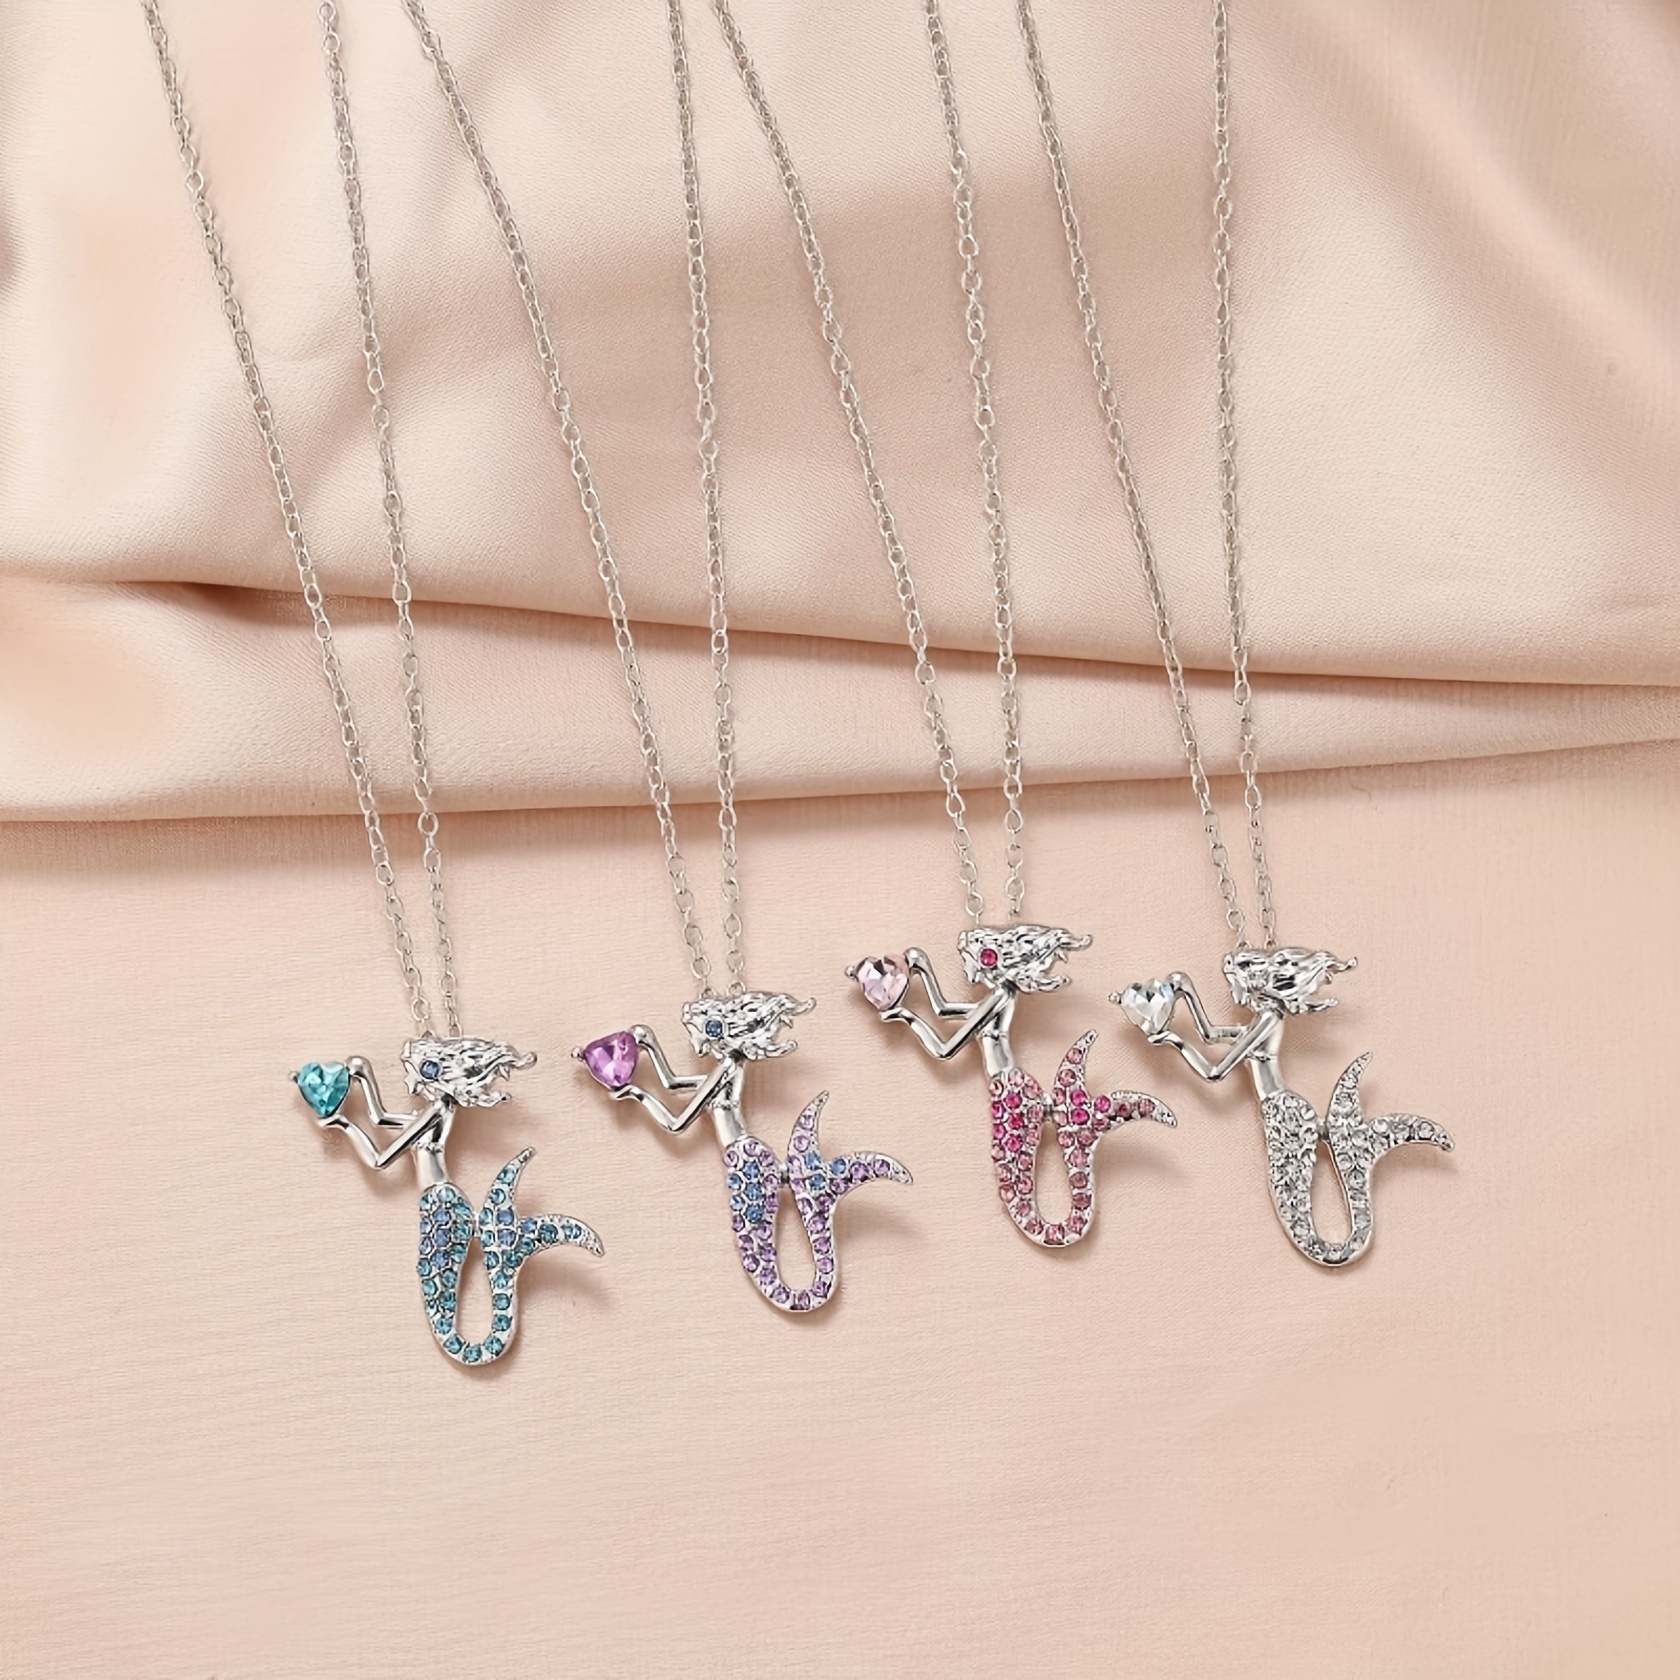 6 Pcs Cute Necklaces for Girls Cat Fairy Mermaid Birthday Gifts For Girls  Teens